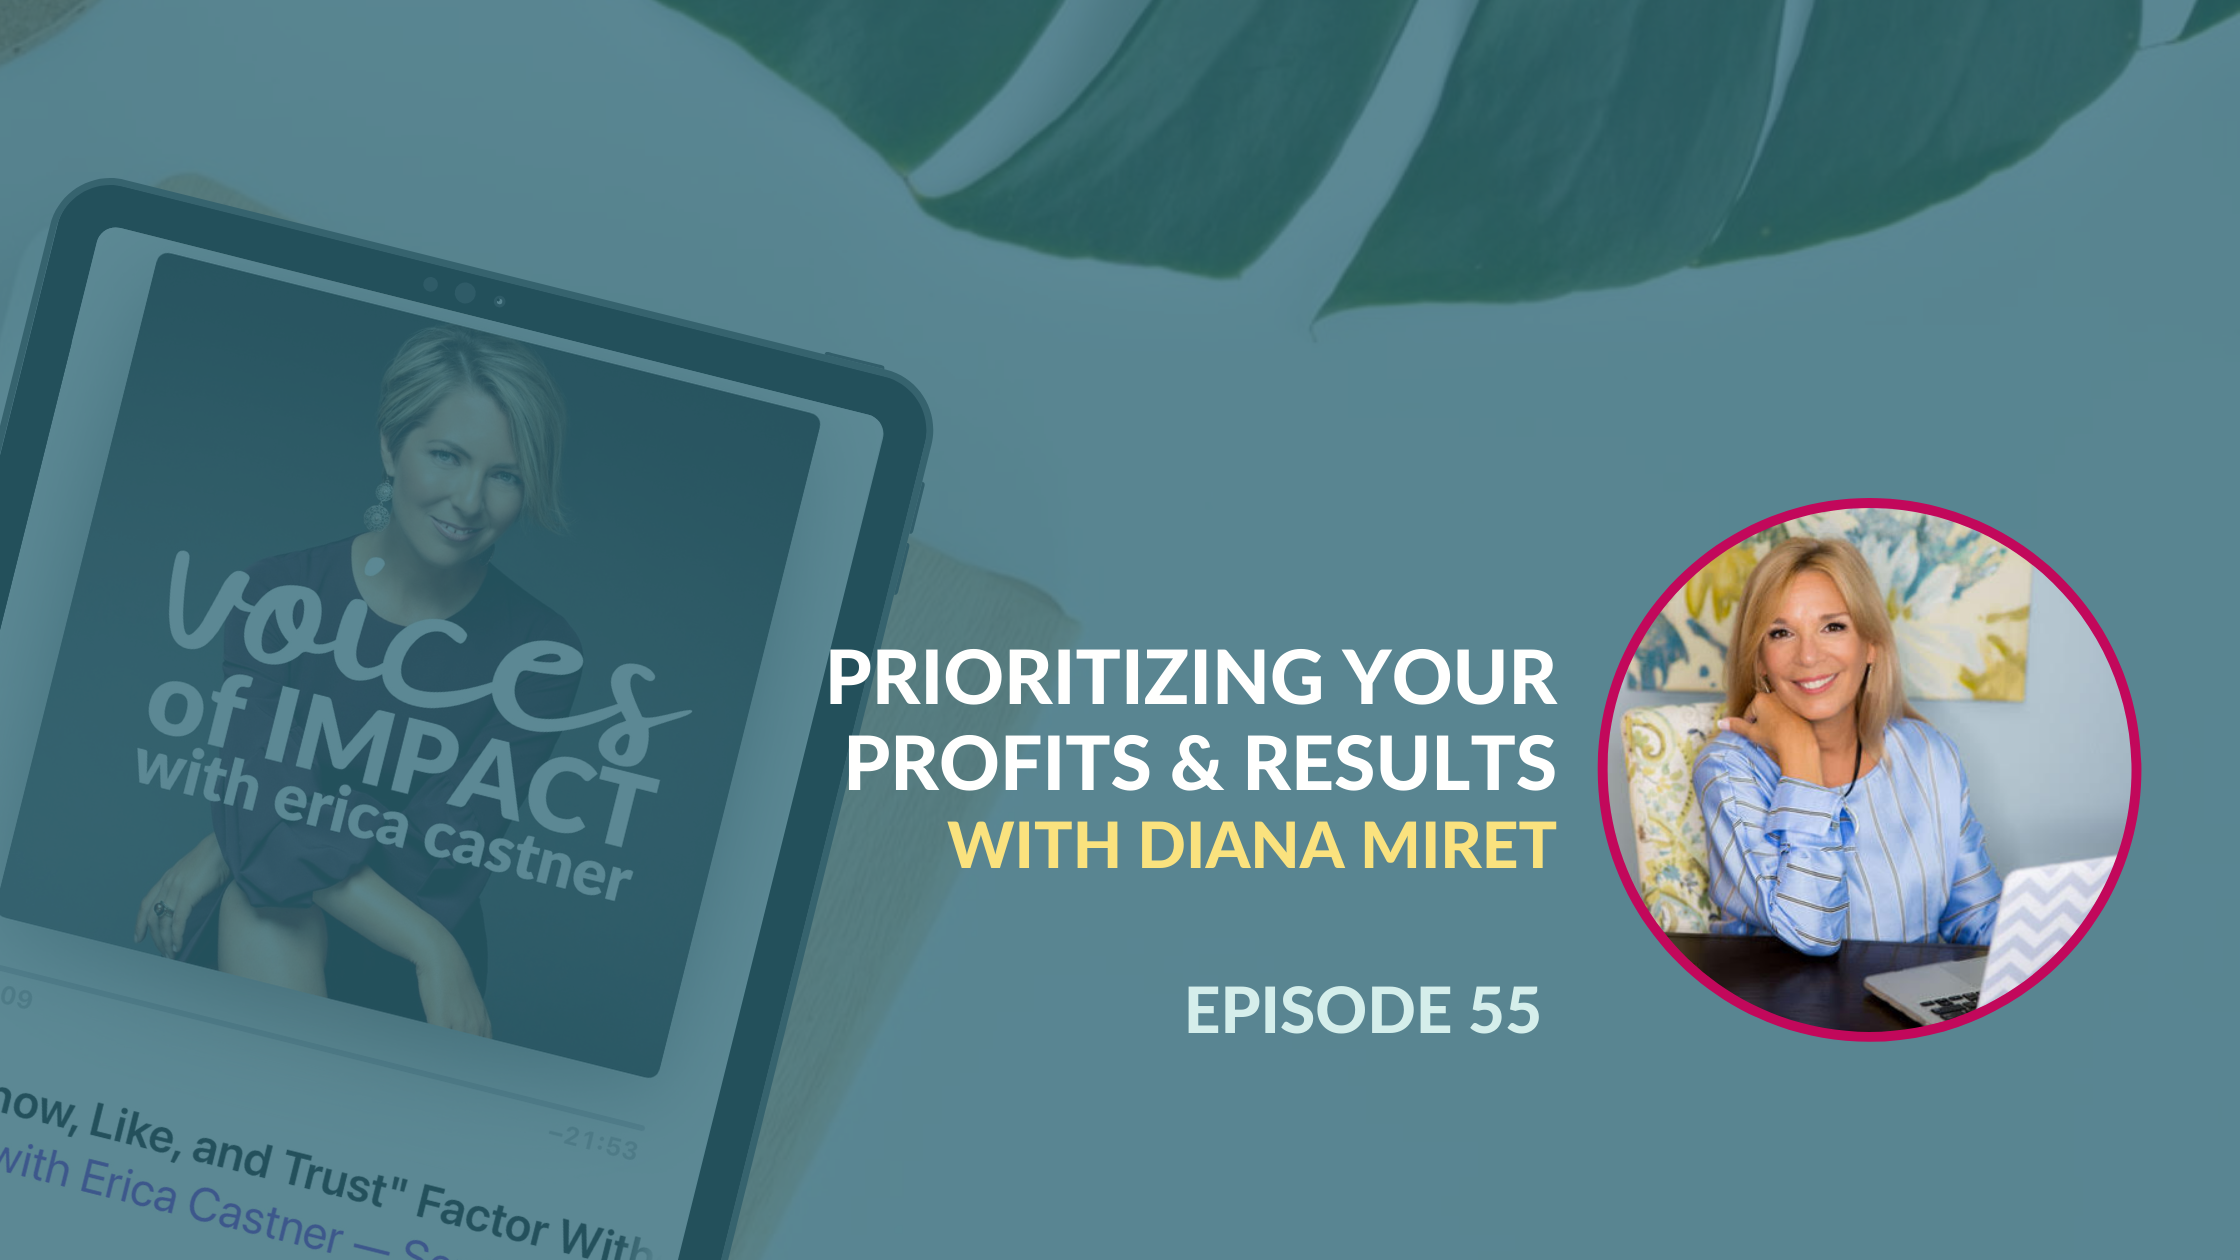 Prioritizing Your Profits & Results with Diana Miret